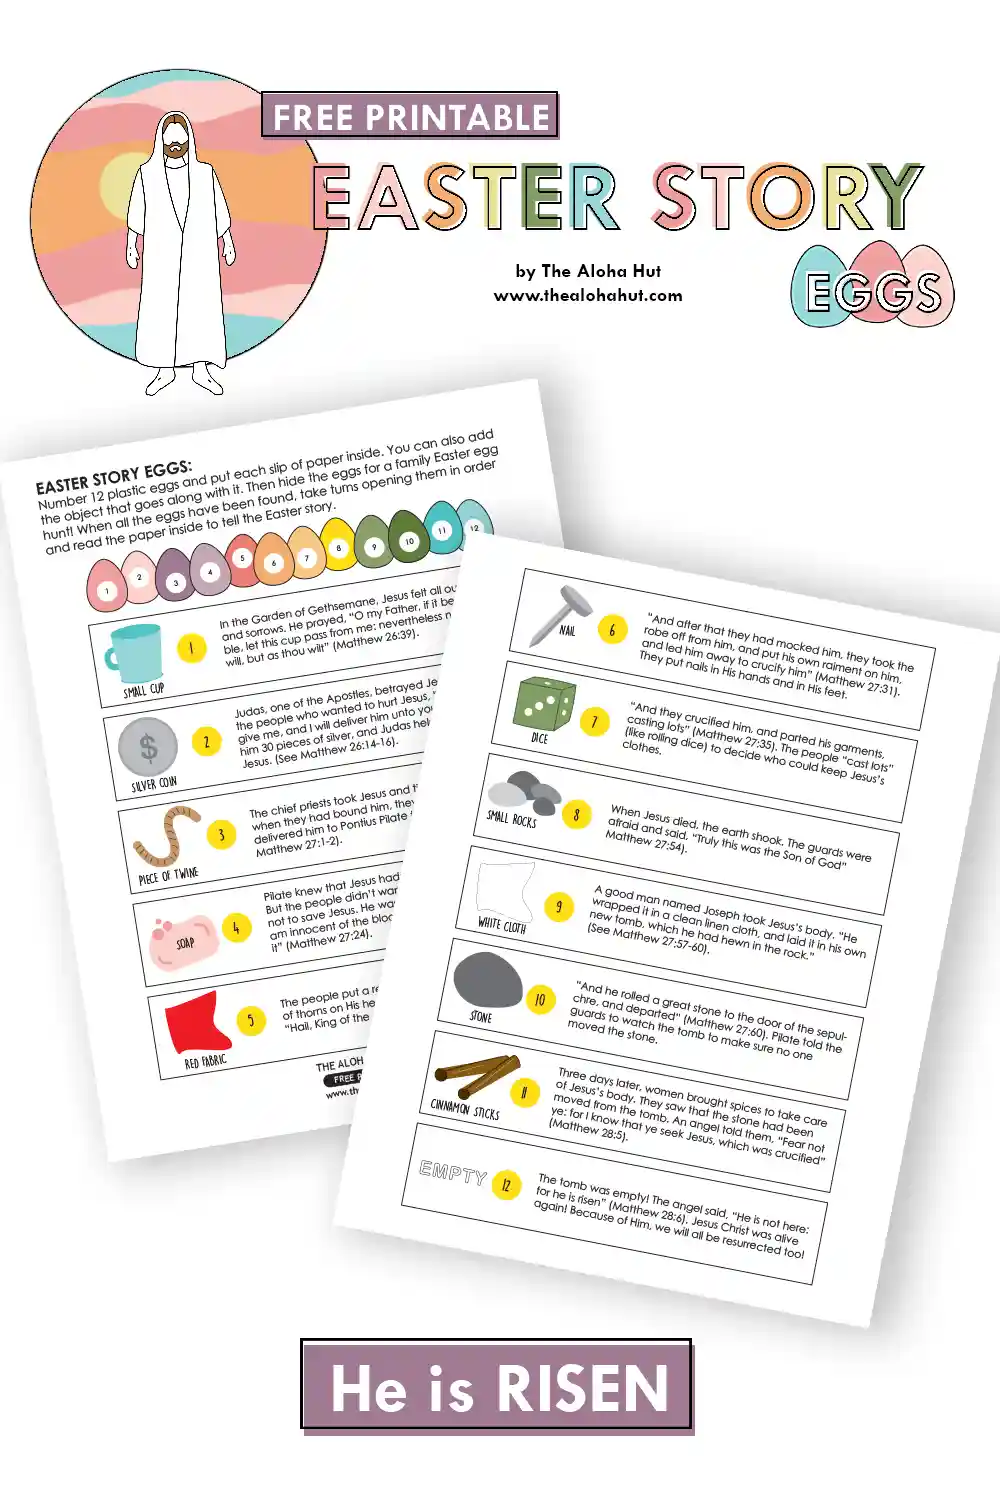 Easter story eggs or Easter Resurrection eggs that help kids learn the true meaning of Easter and teach about the resurrection of Jesus Christ. Use these Easter Story Eggs for a fun and interactive Easter lesson or for a family Easter tradition.